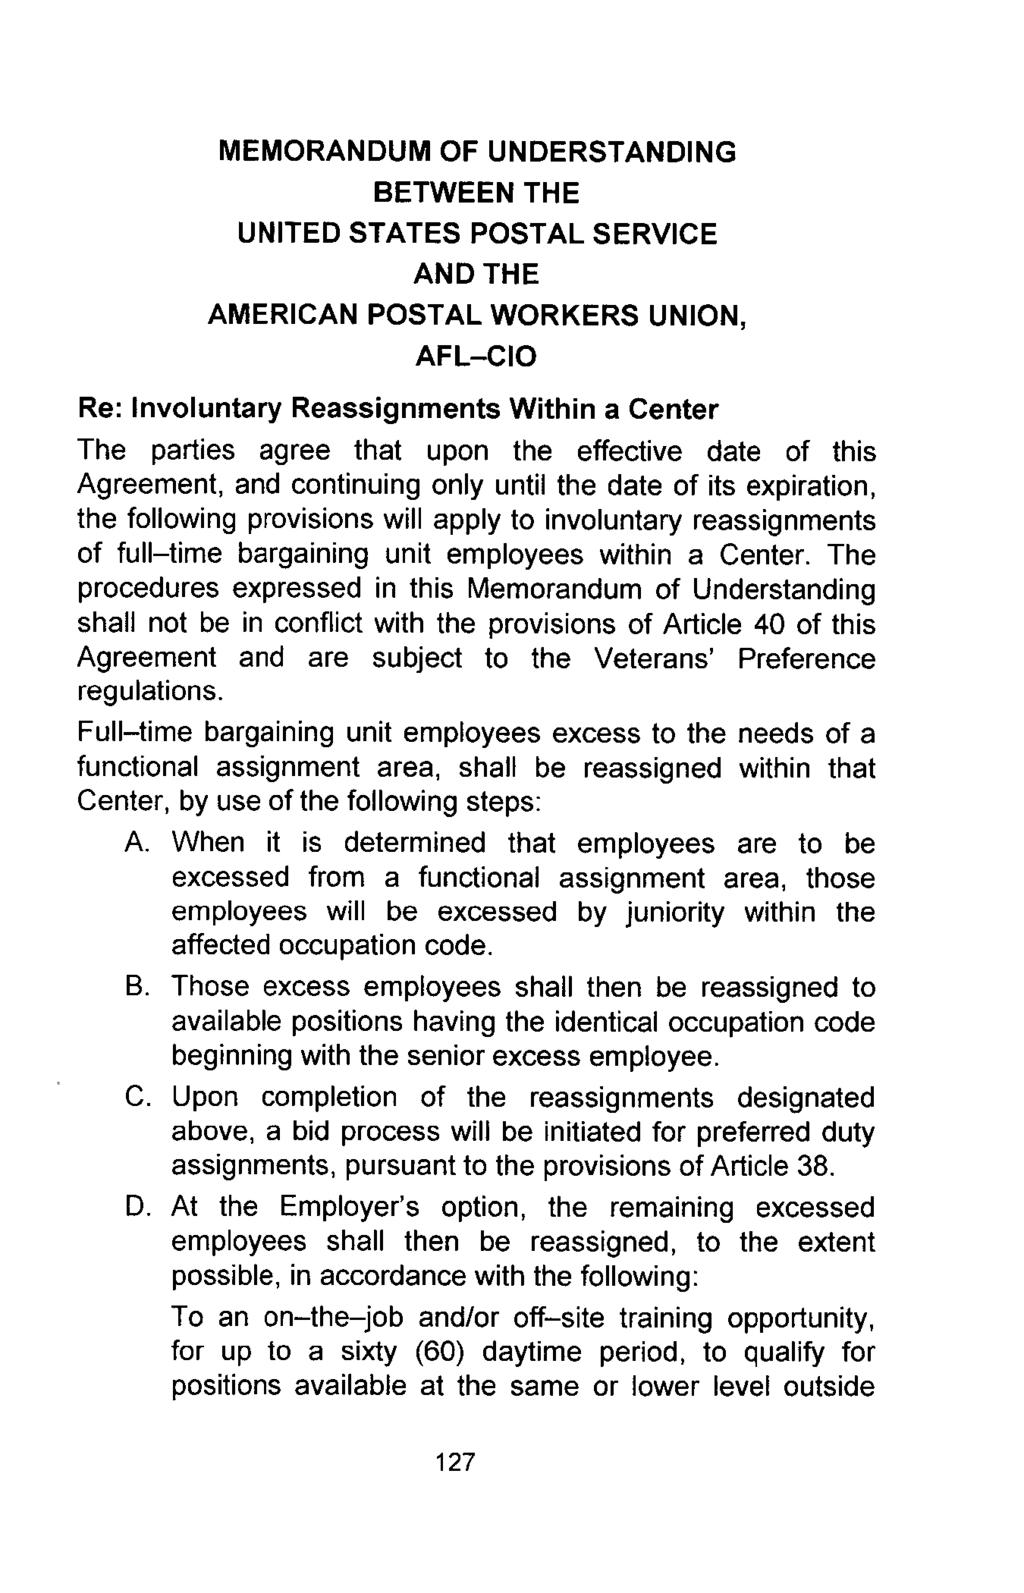 MEMORANDUM OF UNDERSTANDING BETWEEN THE UNITED STATES POSTAL SERVICE AND THE AMERICAN POSTAL WORKERS UNION, AFL-CIO Re : Involuntary Reassignments Within a Center The parties agree that upon the